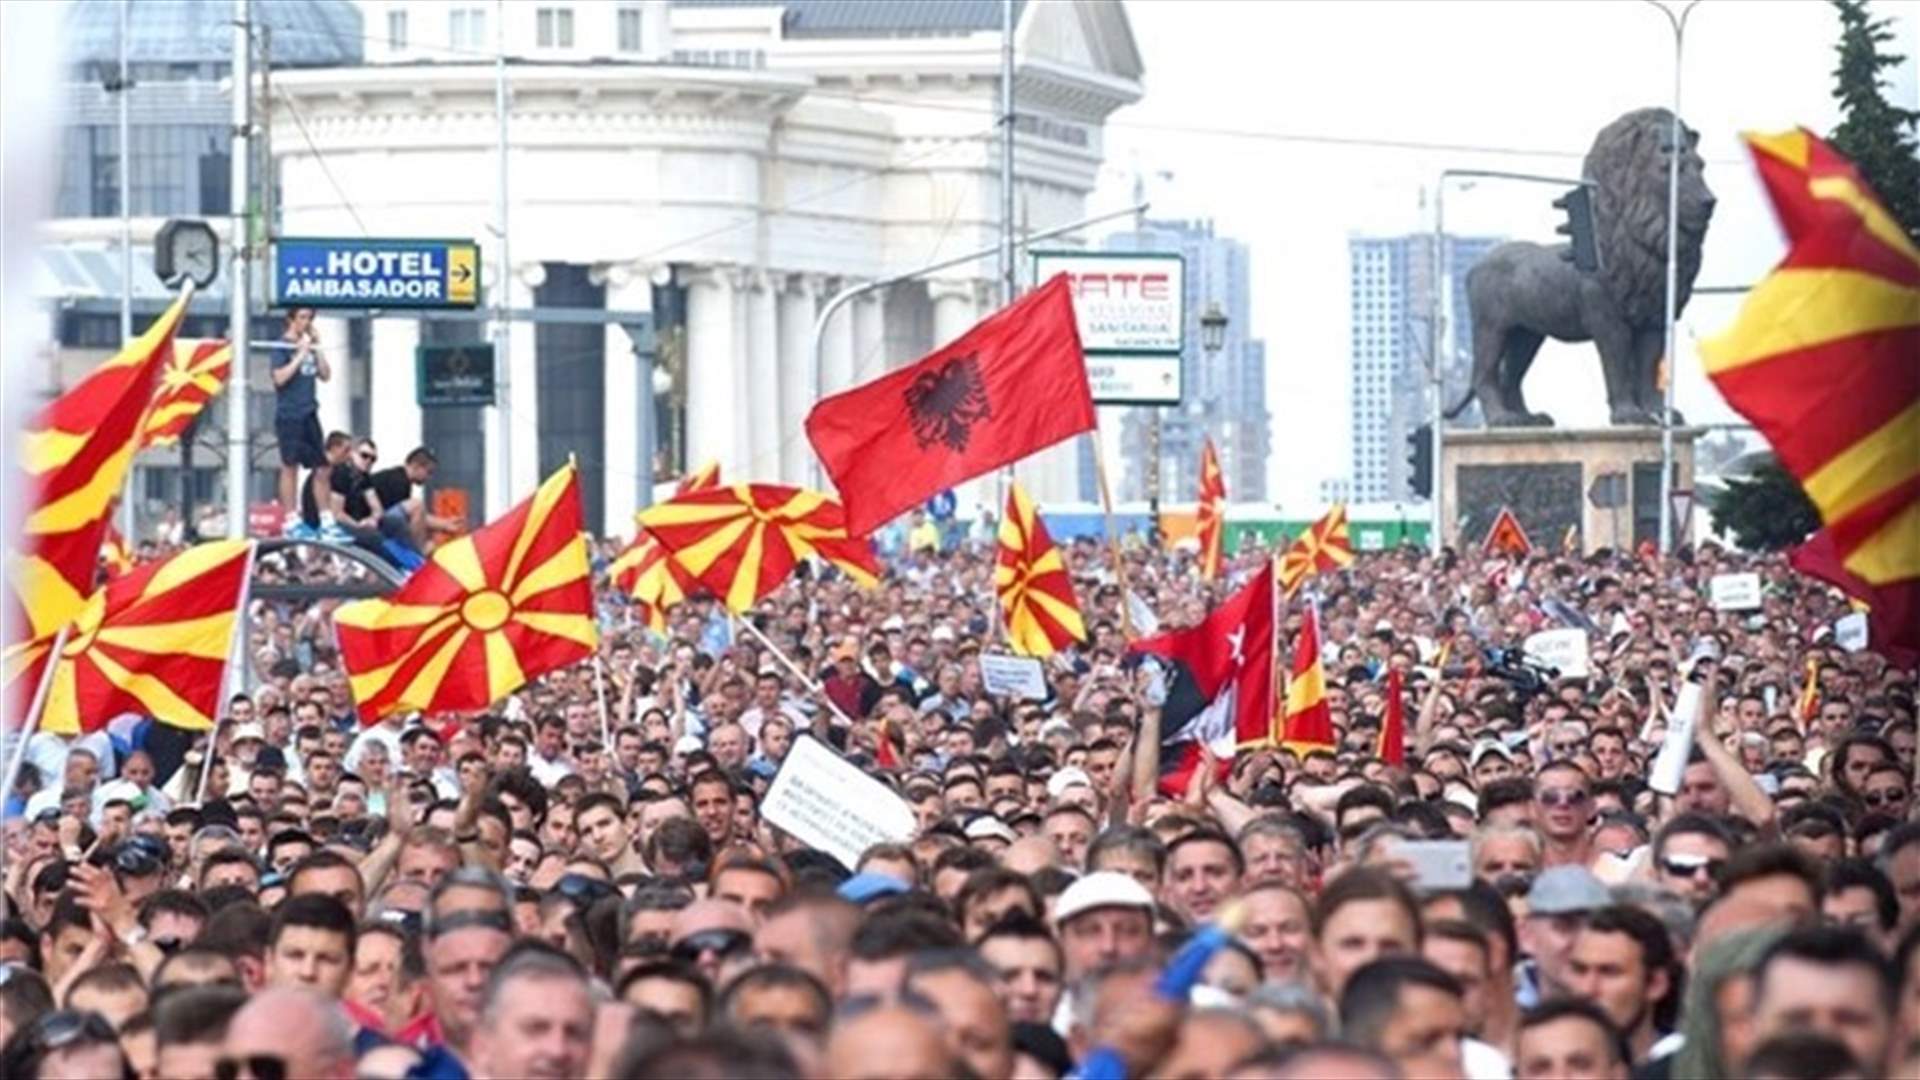 Macedonia: Protests turn violent after politicians pardoned